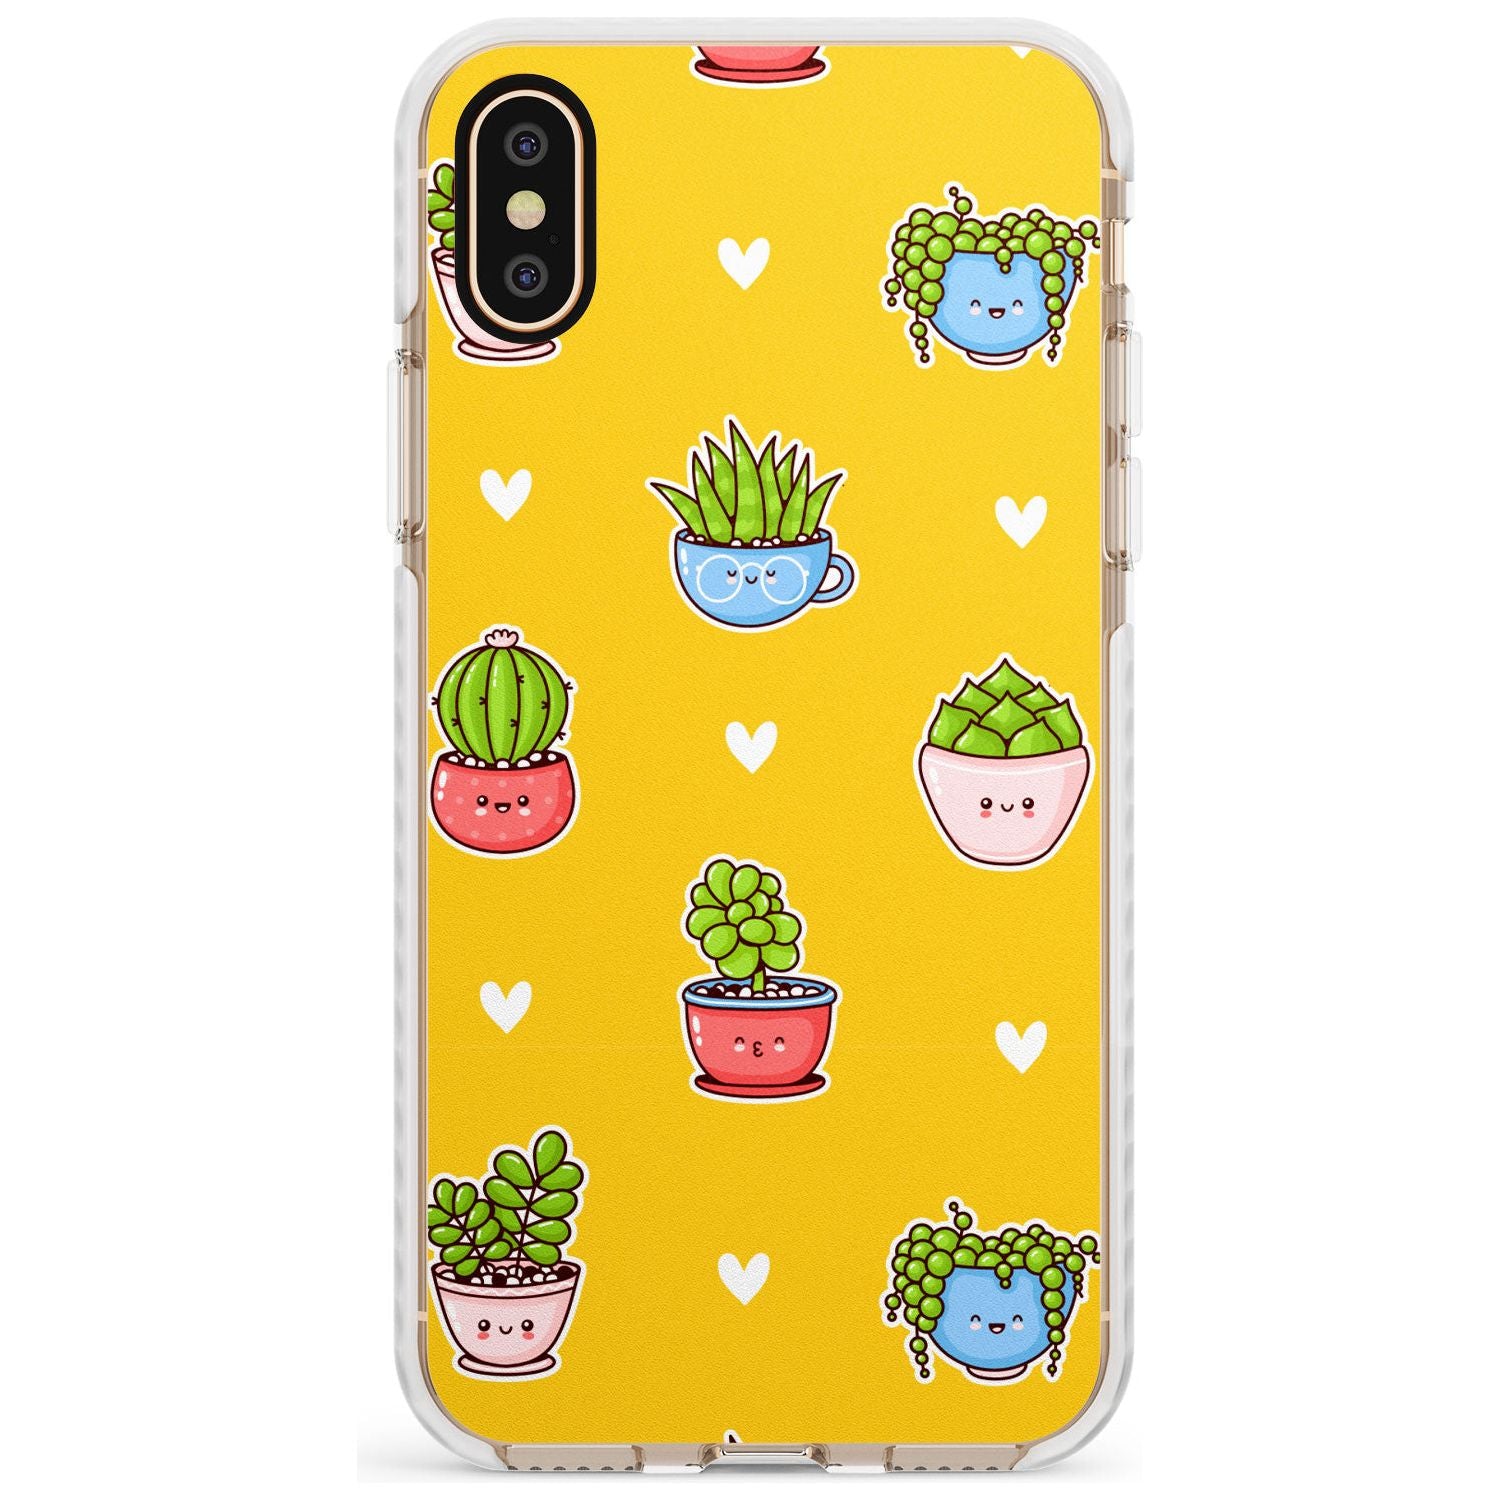 Plant Faces Kawaii Pattern Impact Phone Case for iPhone X XS Max XR